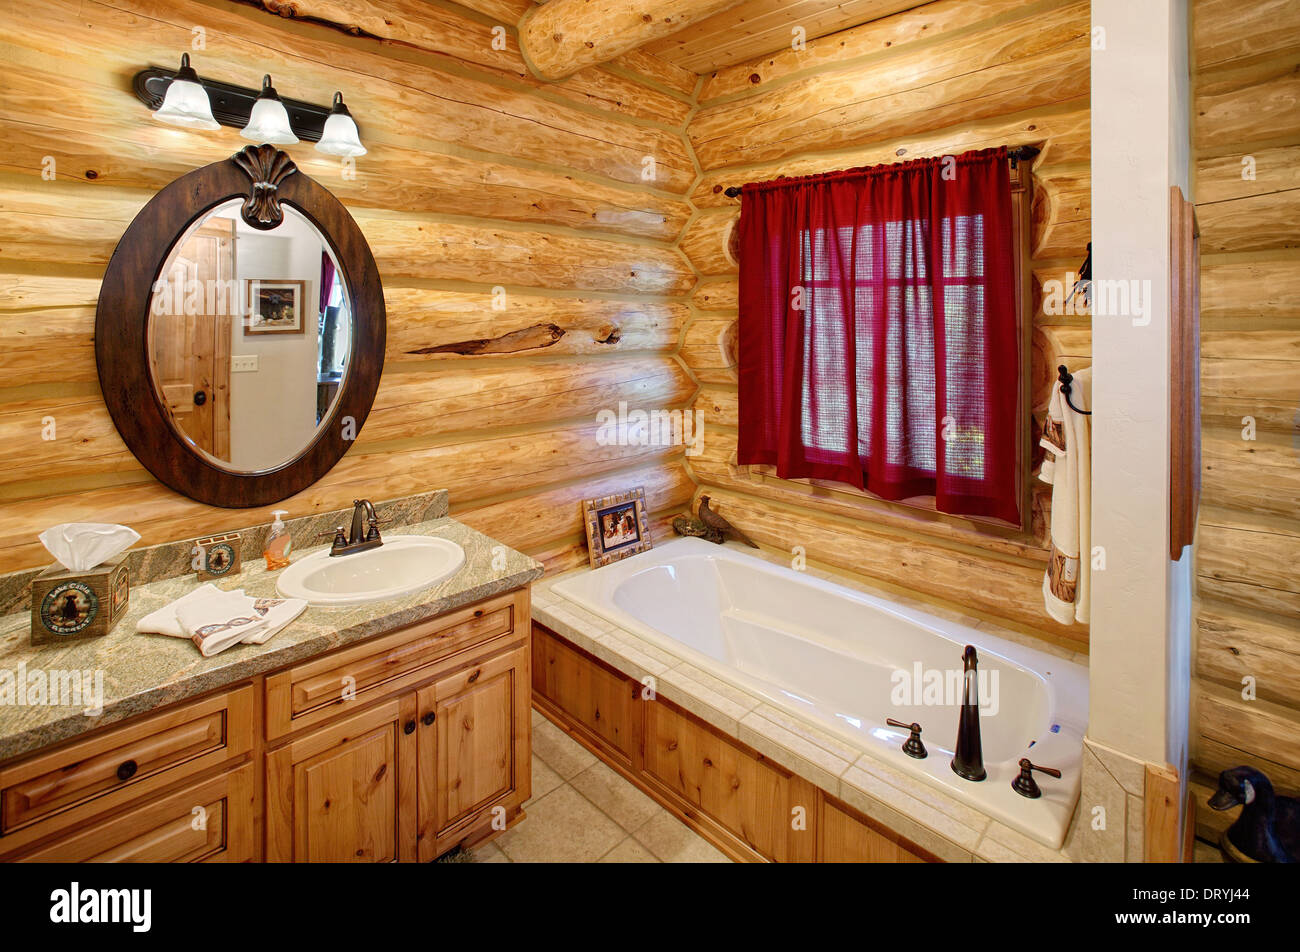 The Bathroom Interior In A Modern Log Cabin It Features